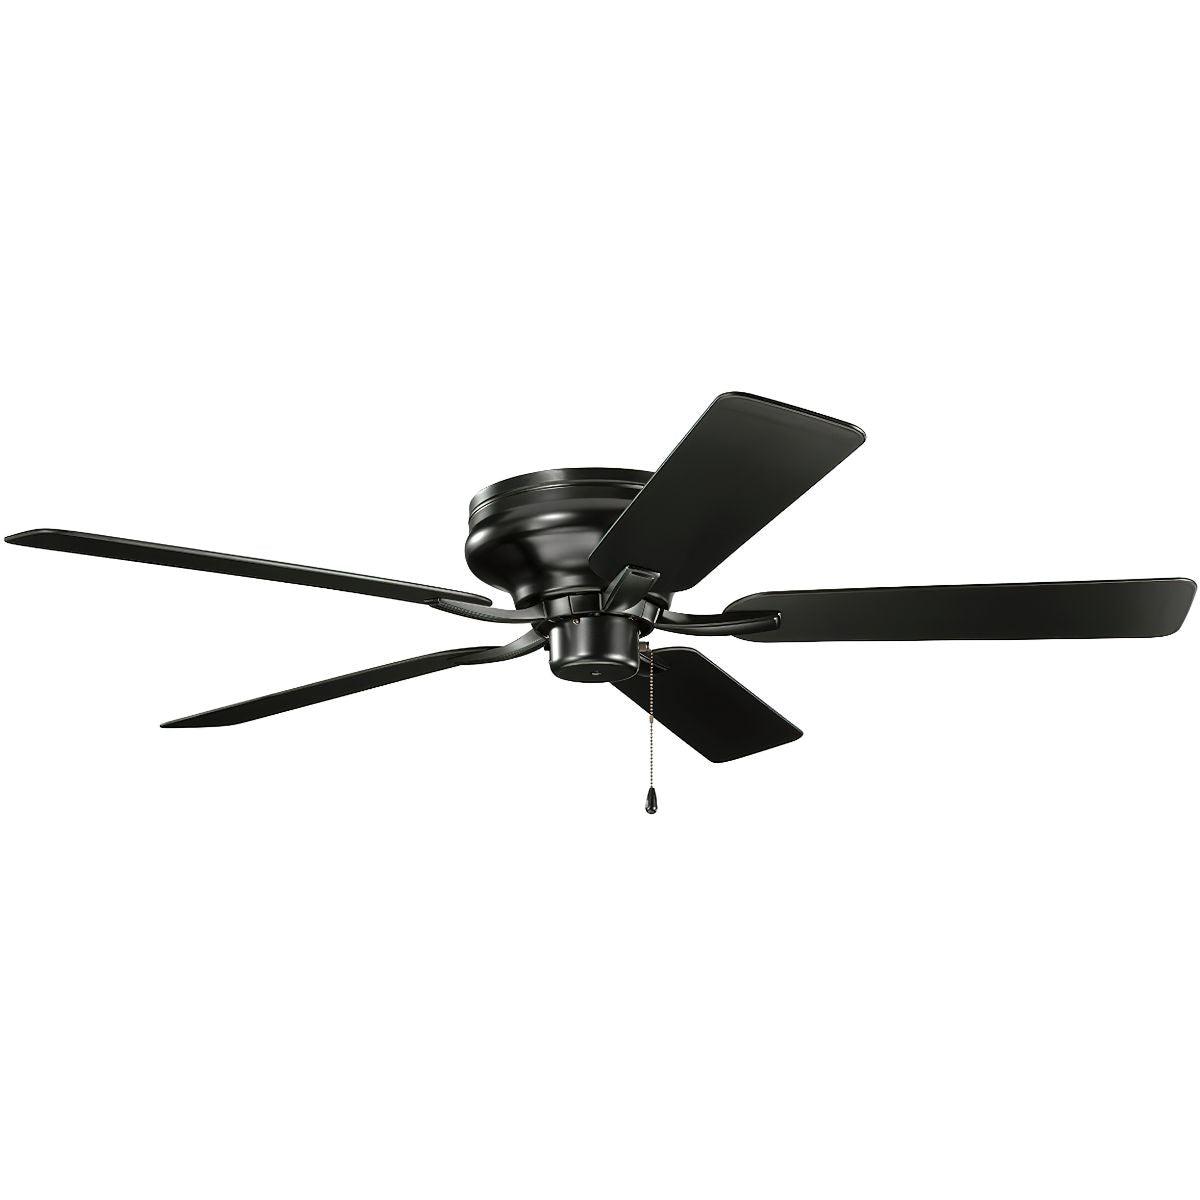 Basics Pro 52 Inch Low Profile Outdoor Ceiling Fan With Pull Chain